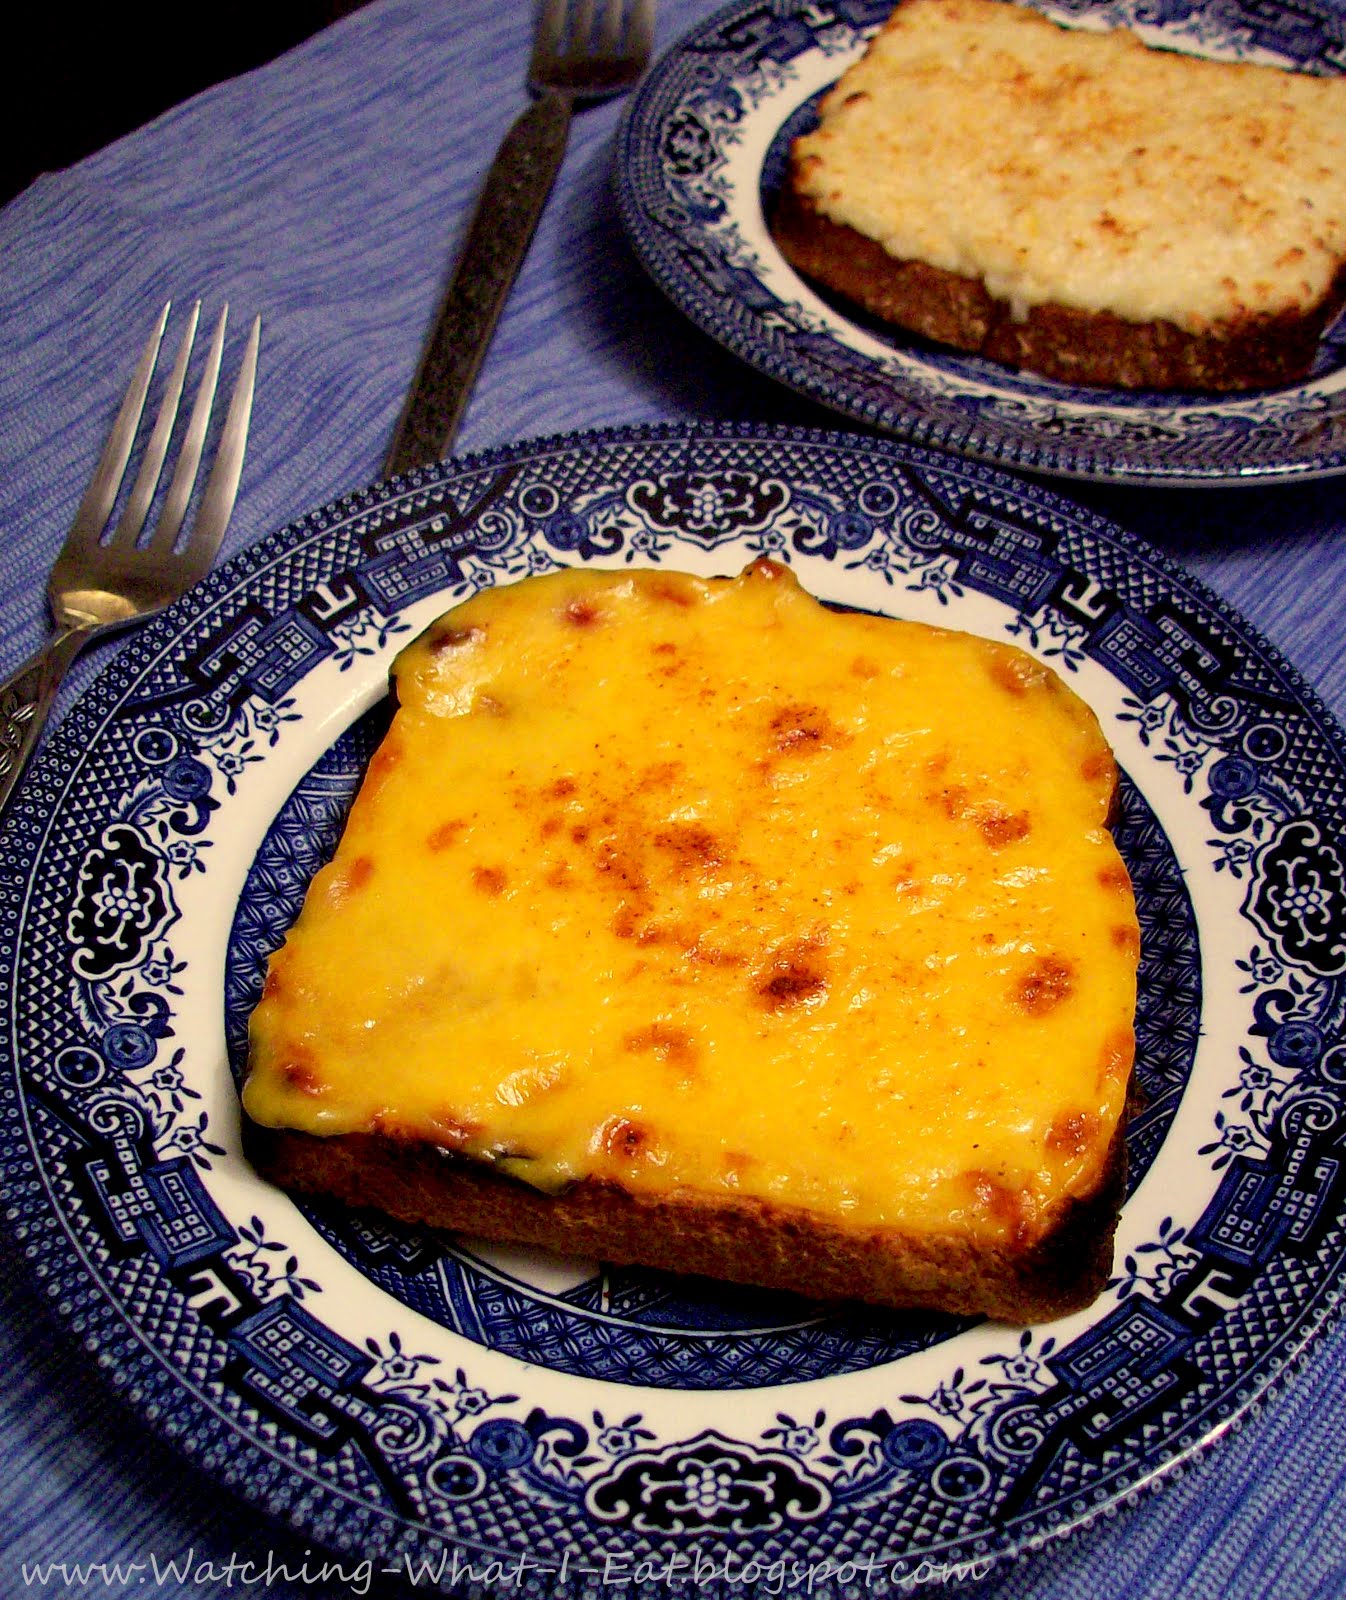 Watching What I Eat: Low Fat Welsh Rarebit ~ Meatless Monday